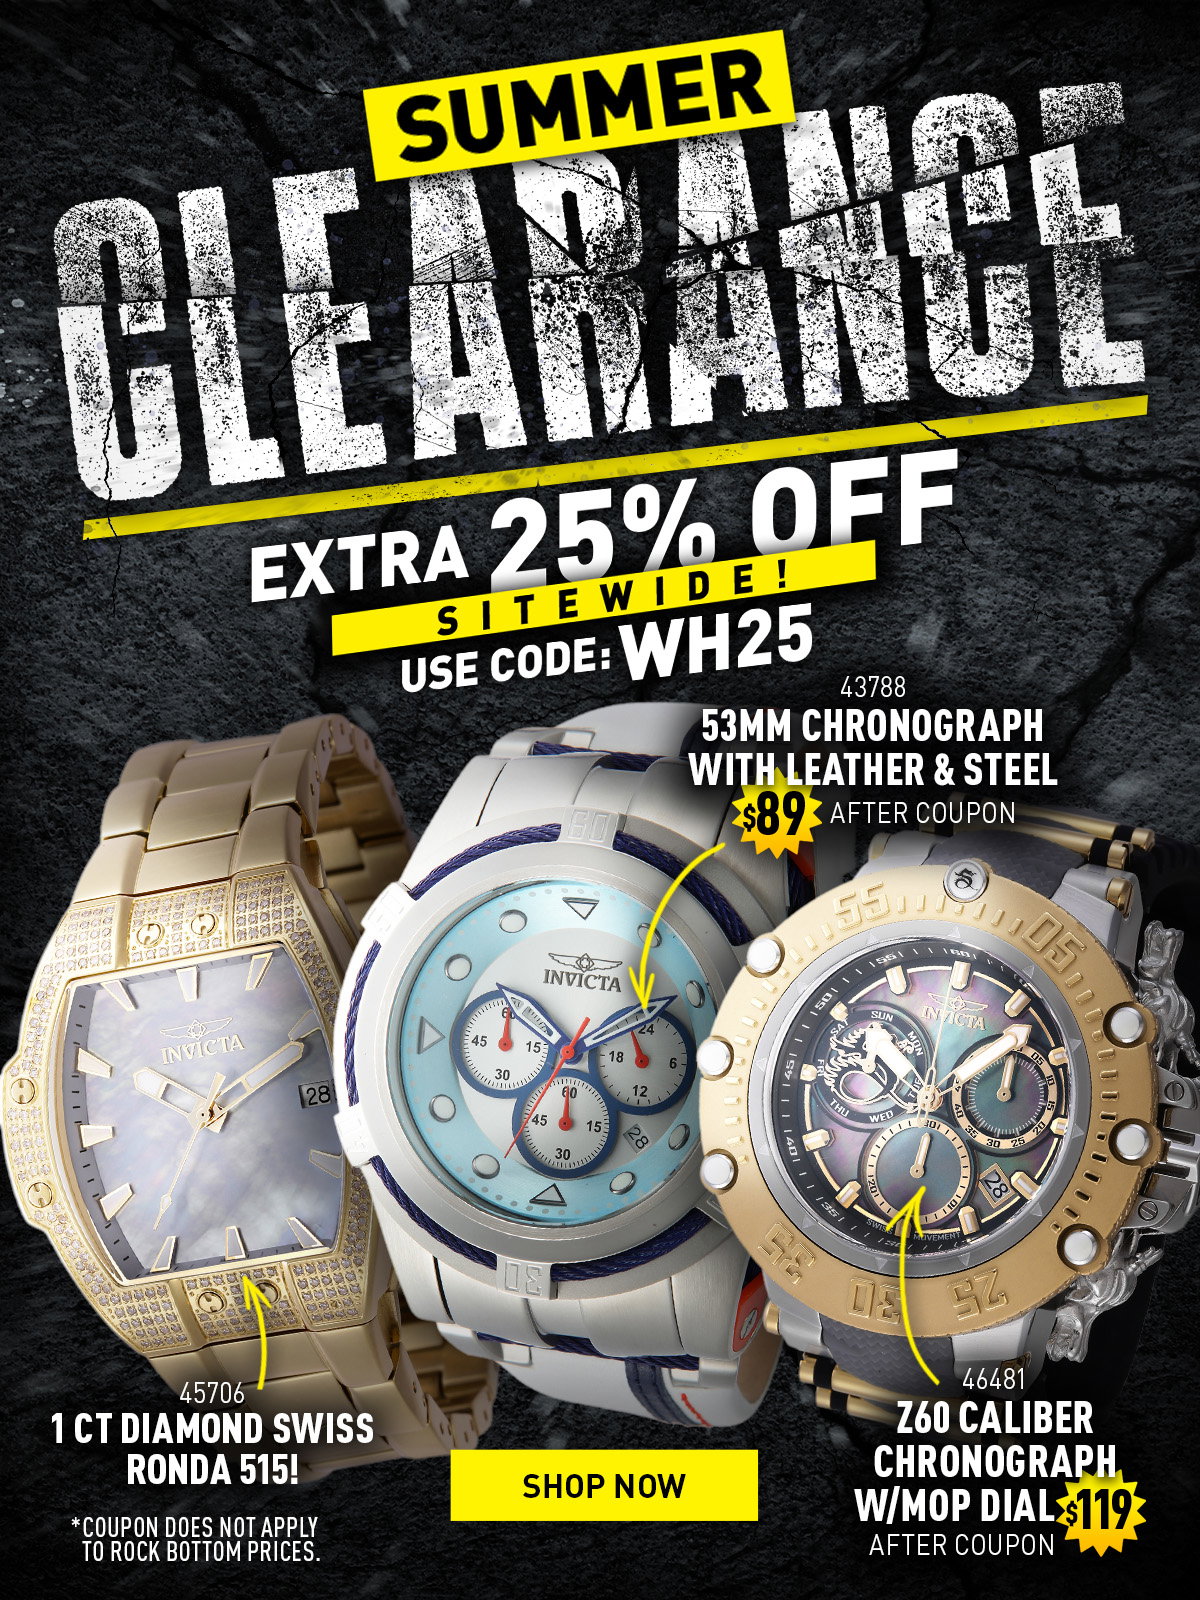 Summer Clearance - Extra 25% OFF